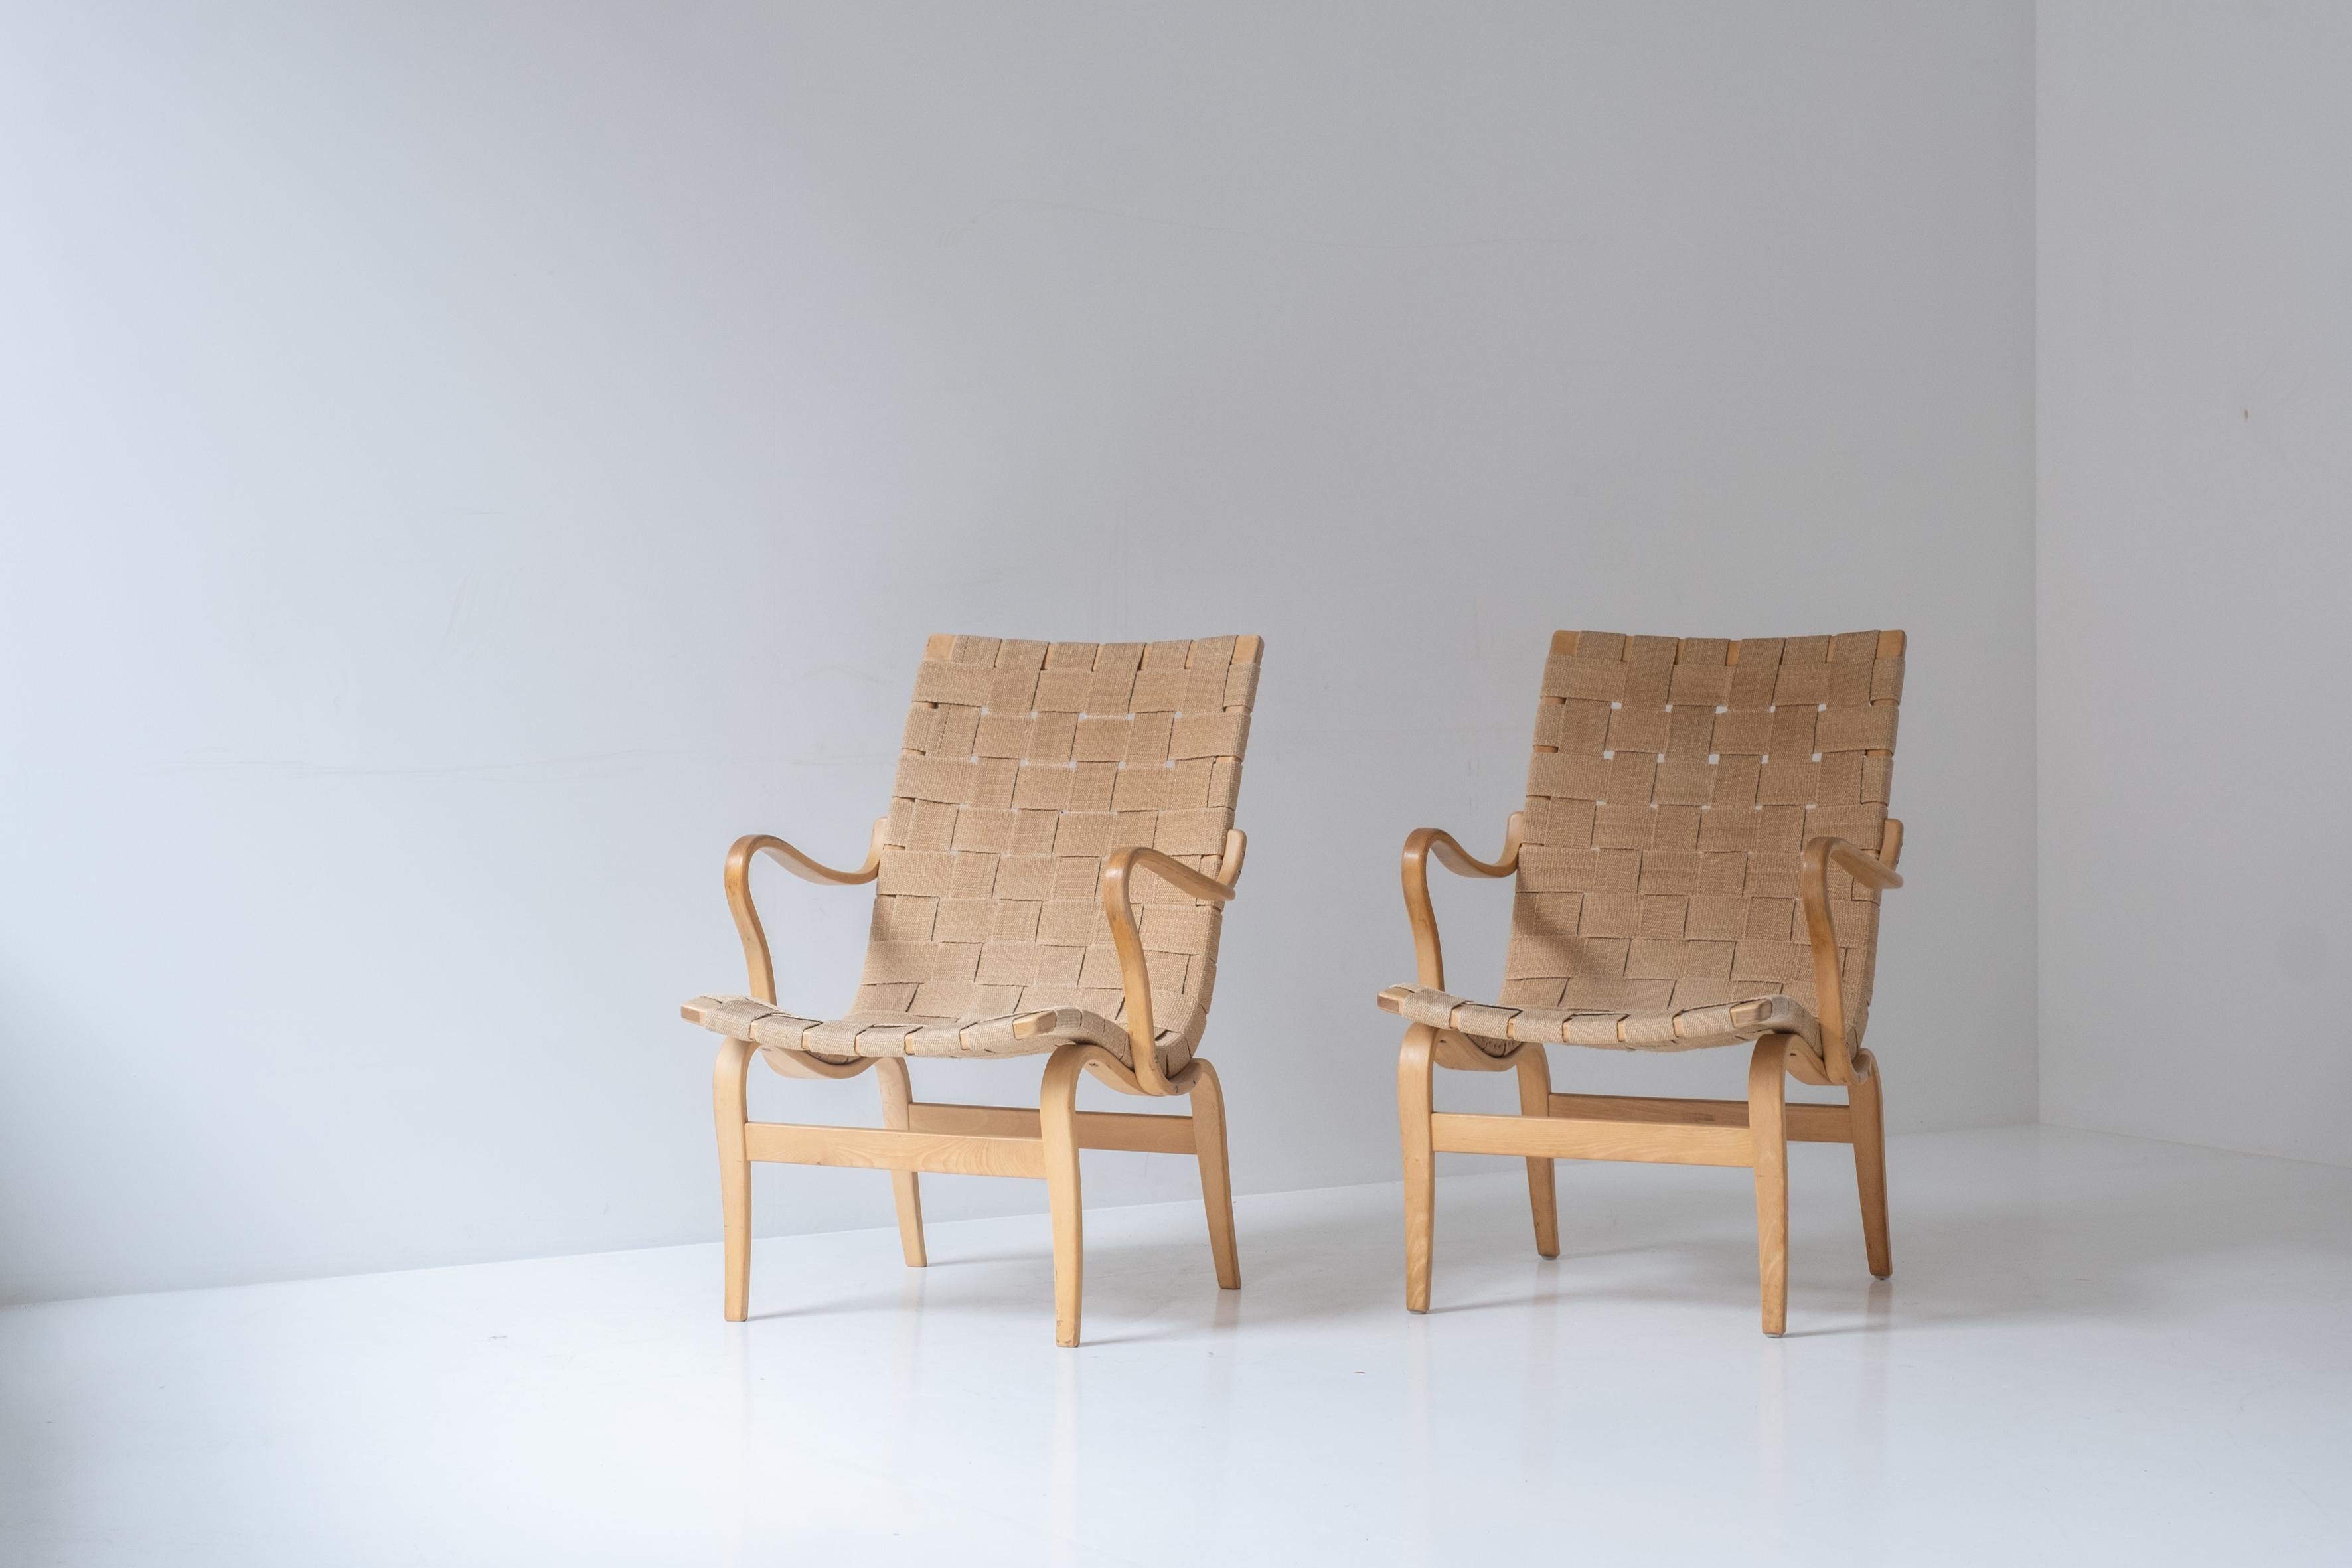 Early edition ‘Eva’ side chair by Bruno Mathsson for Karl Mathsson, Sweden 1960s. This one features a solid birch frame and has the original woven seat and back. Few signs of wear, overall in a very good and original condition. Signed underneath.